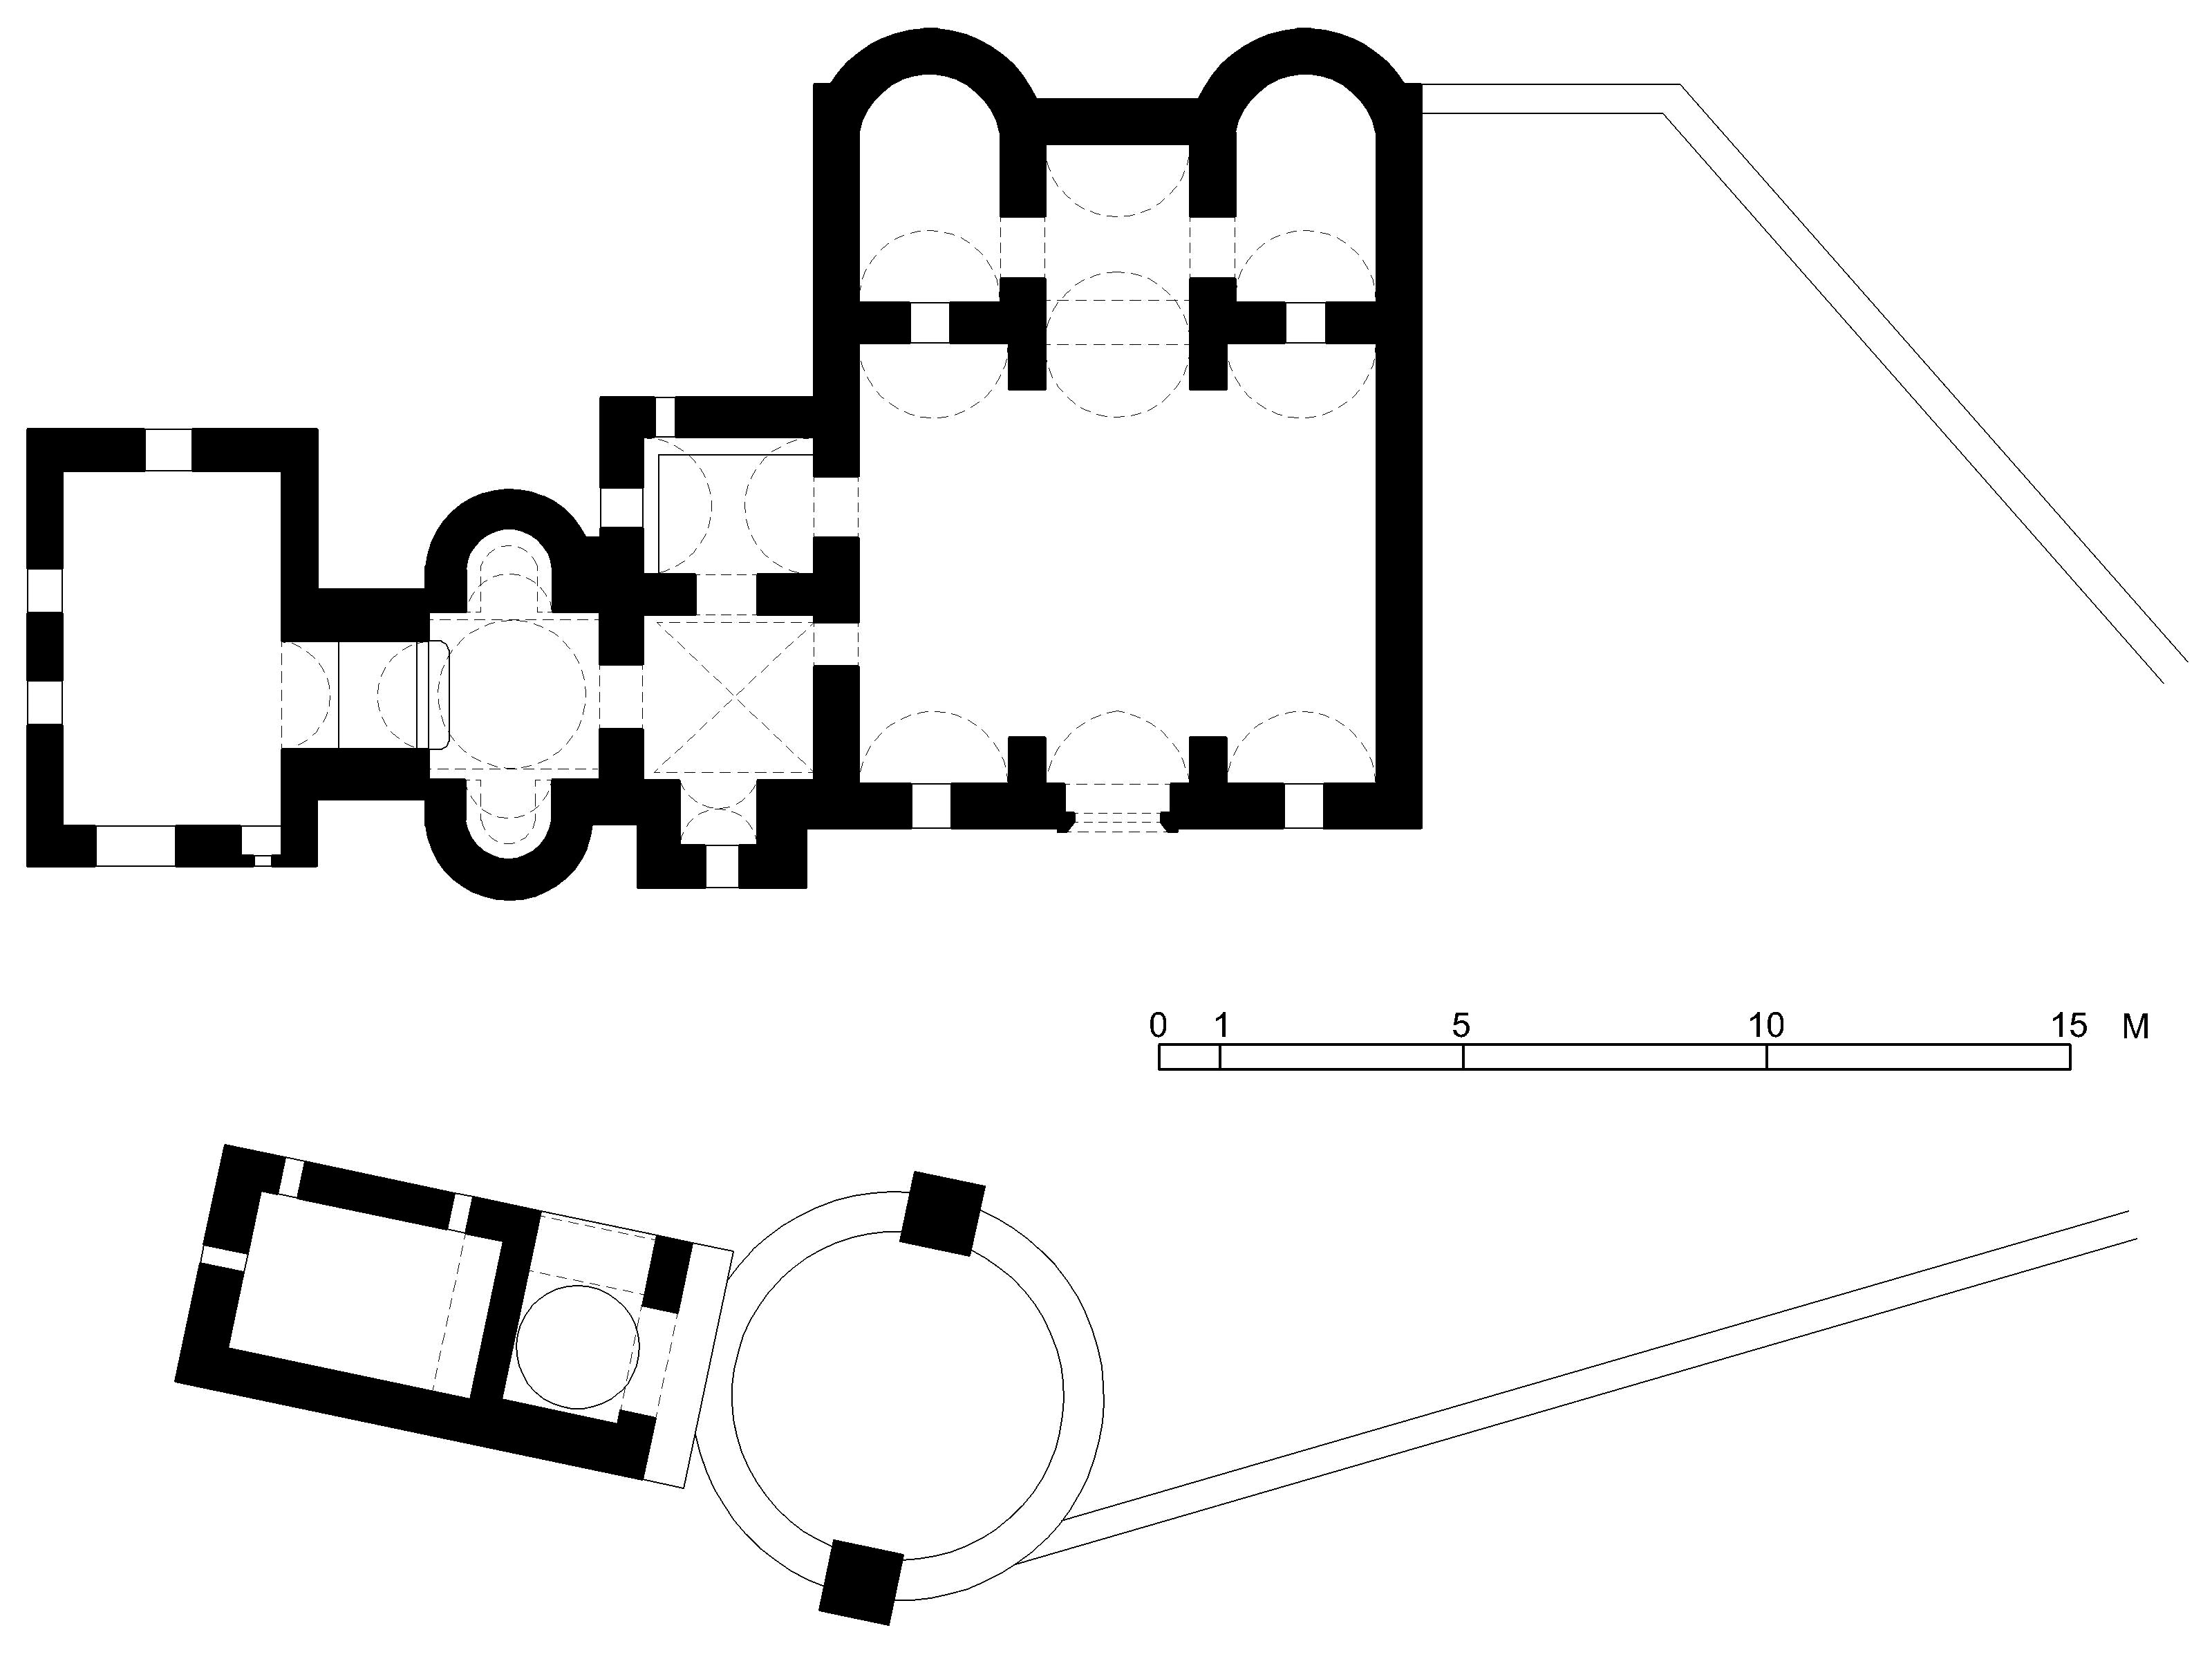 Qusayr 'Amra - Floor plan of palace in AutoCAD 2000 format. Click the download button to download a zipped file containing the .dwg file.